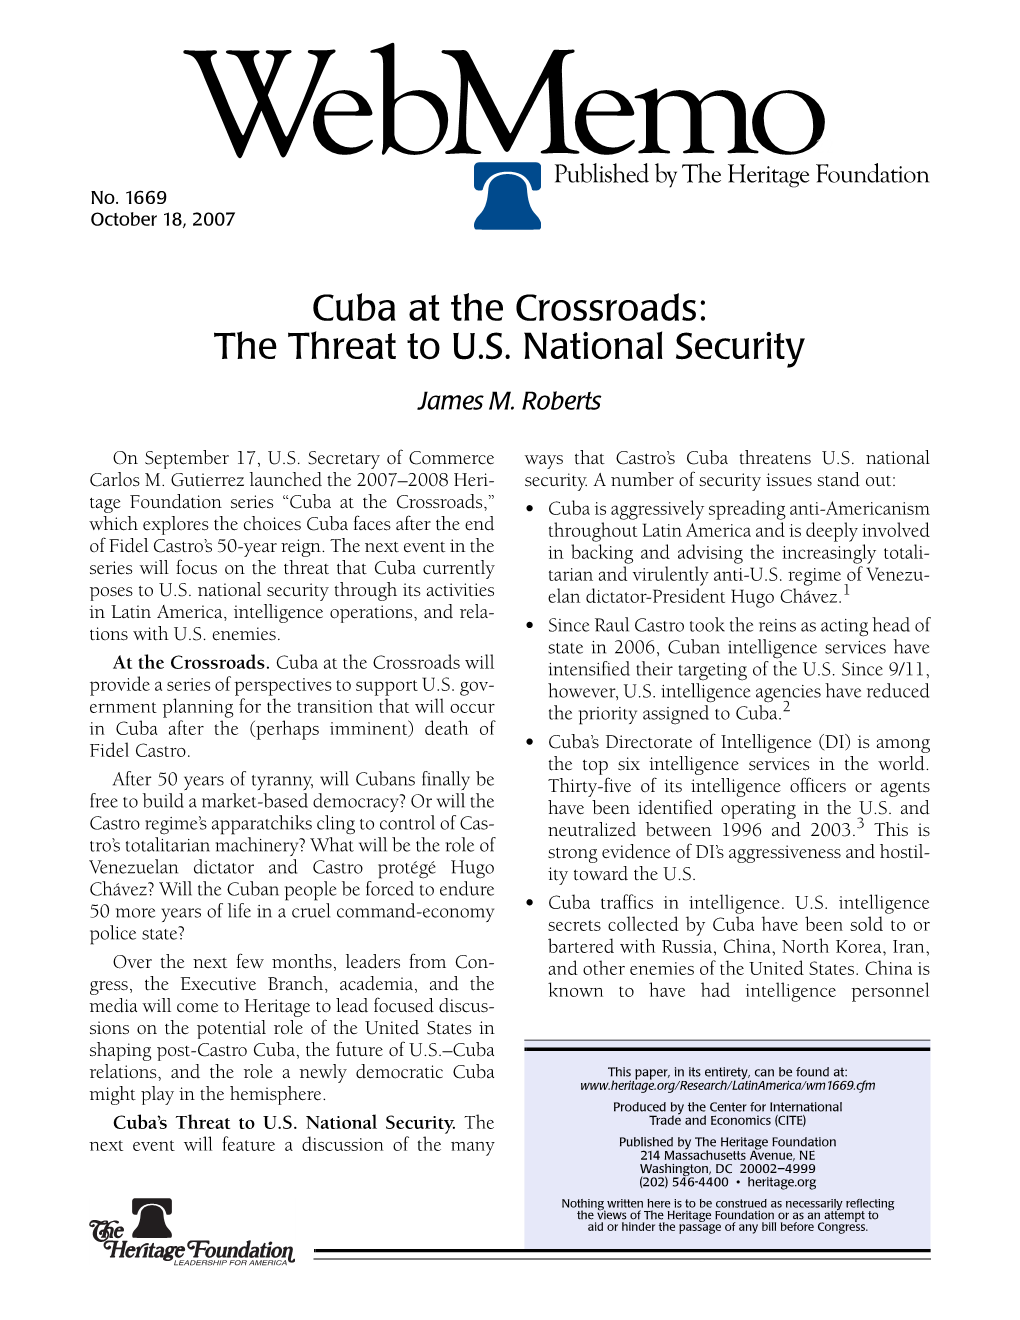 Cuba at the Crossroads: the Threat to U.S. National Security James M